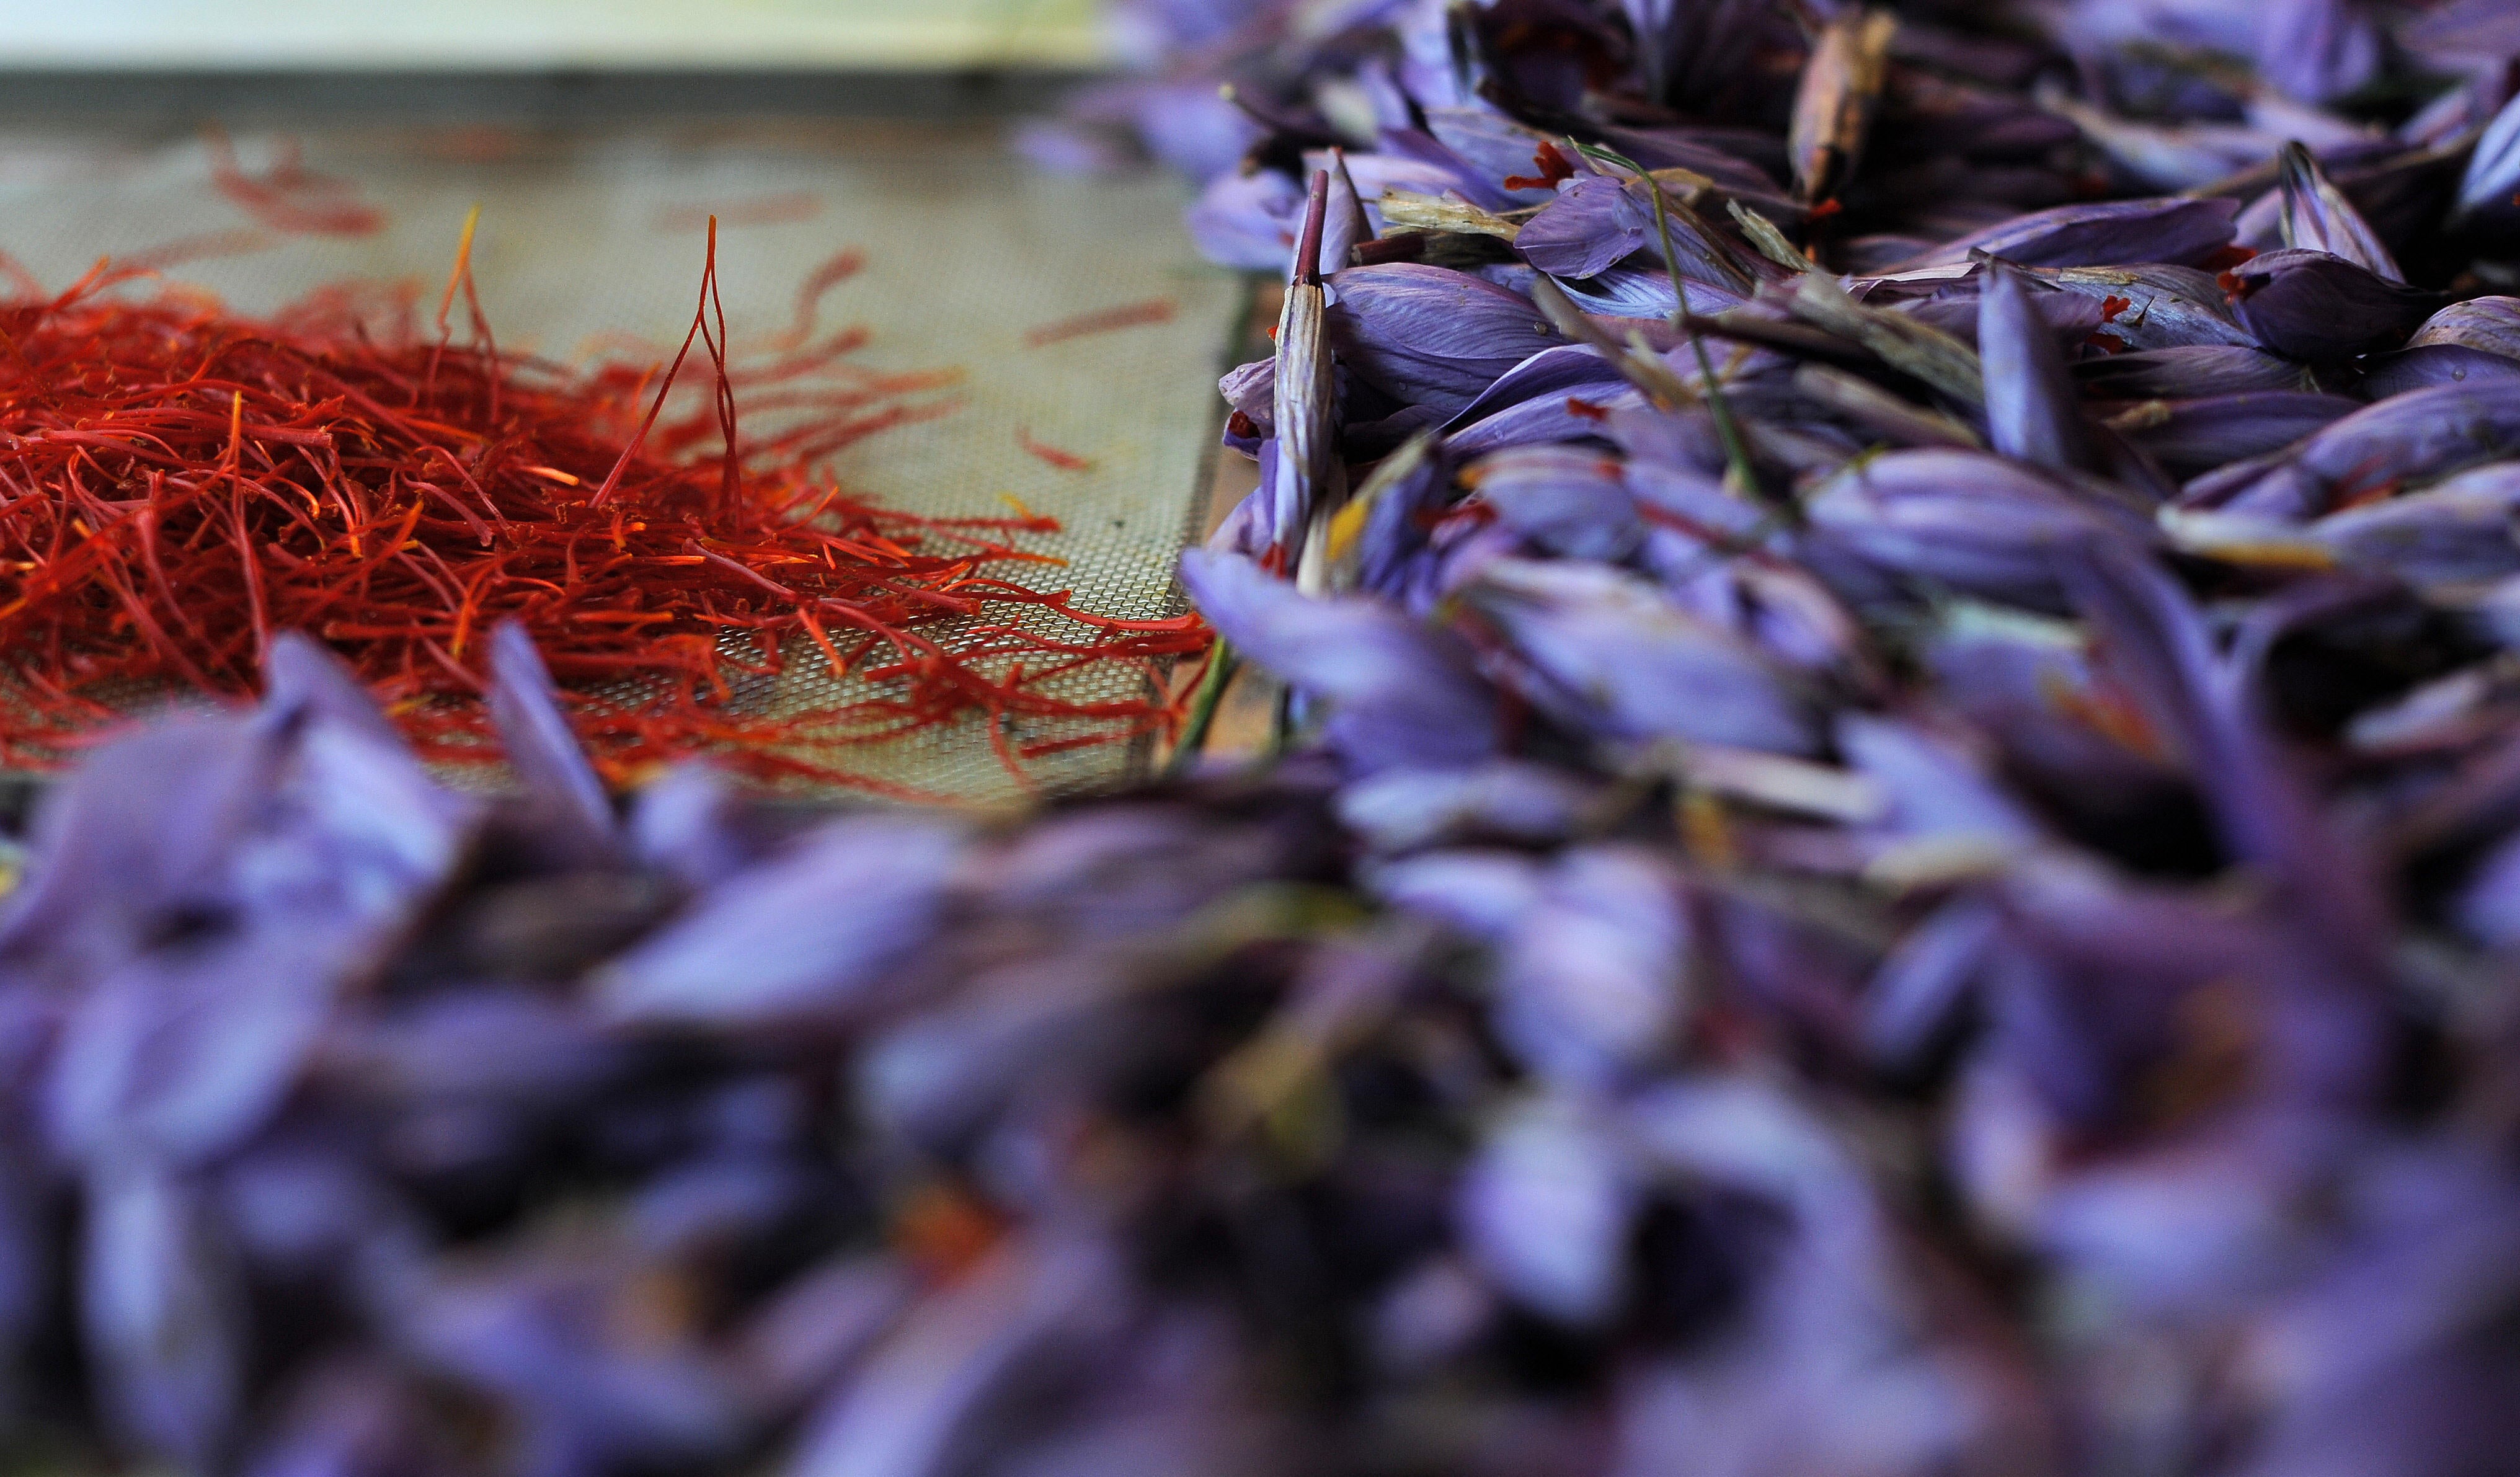 Flowers and stigmas of Crocus Sativus, the saffron crocus, lay on a table, during saffron harvest on November 4, 2008 in Tuscany, Italy.